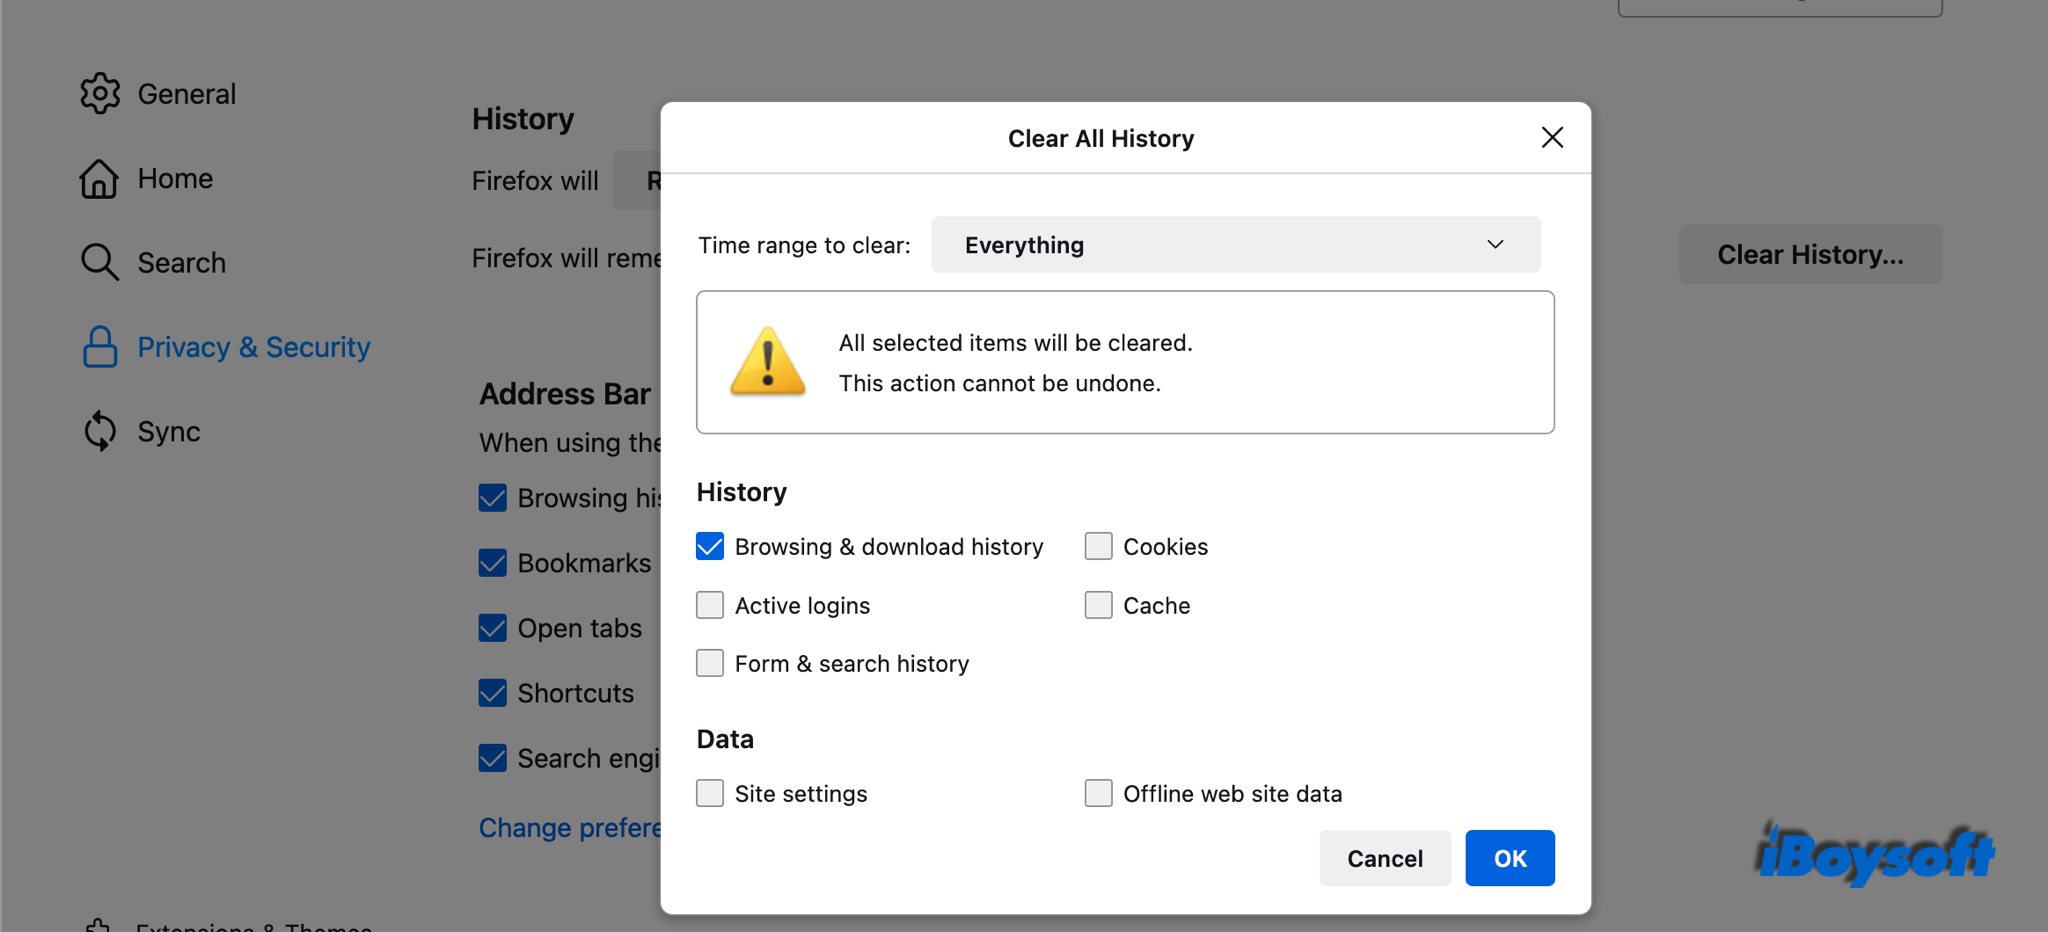 clear all history in Firefox